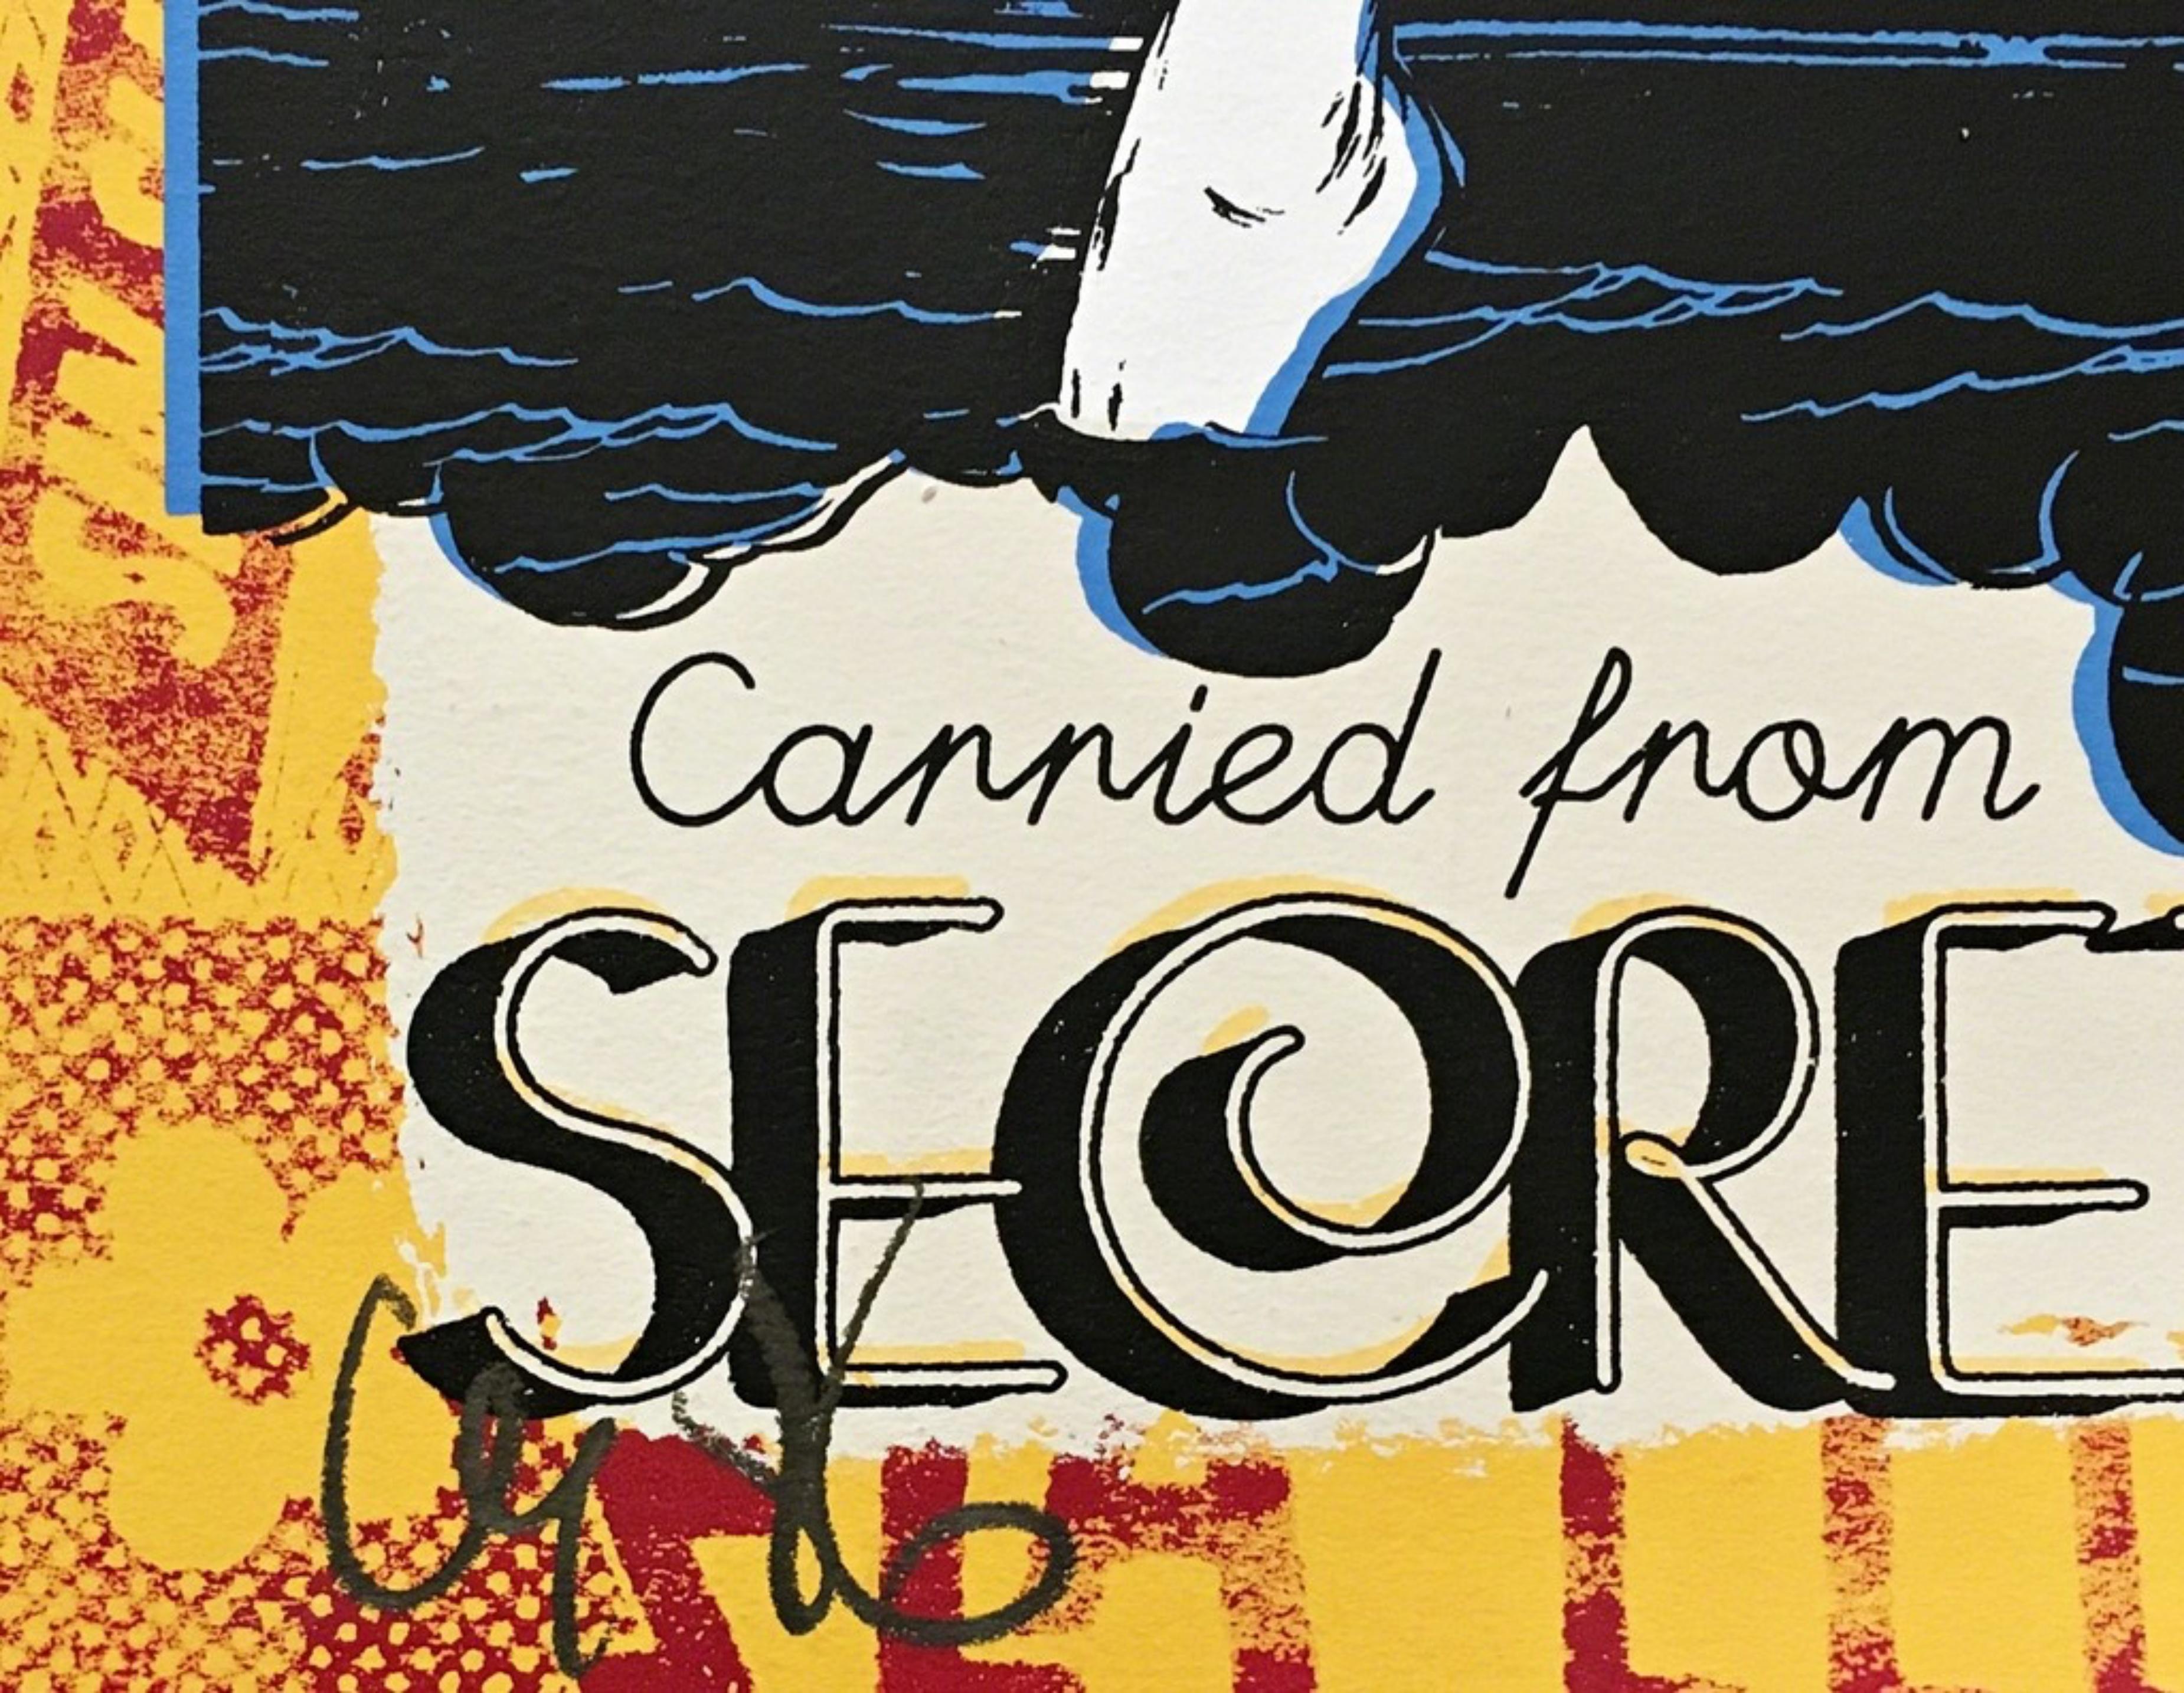 Secret Seas: Acrylic, Silkscreen Ink on paper (unique signed numbered variant) - Street Art Print by Faile